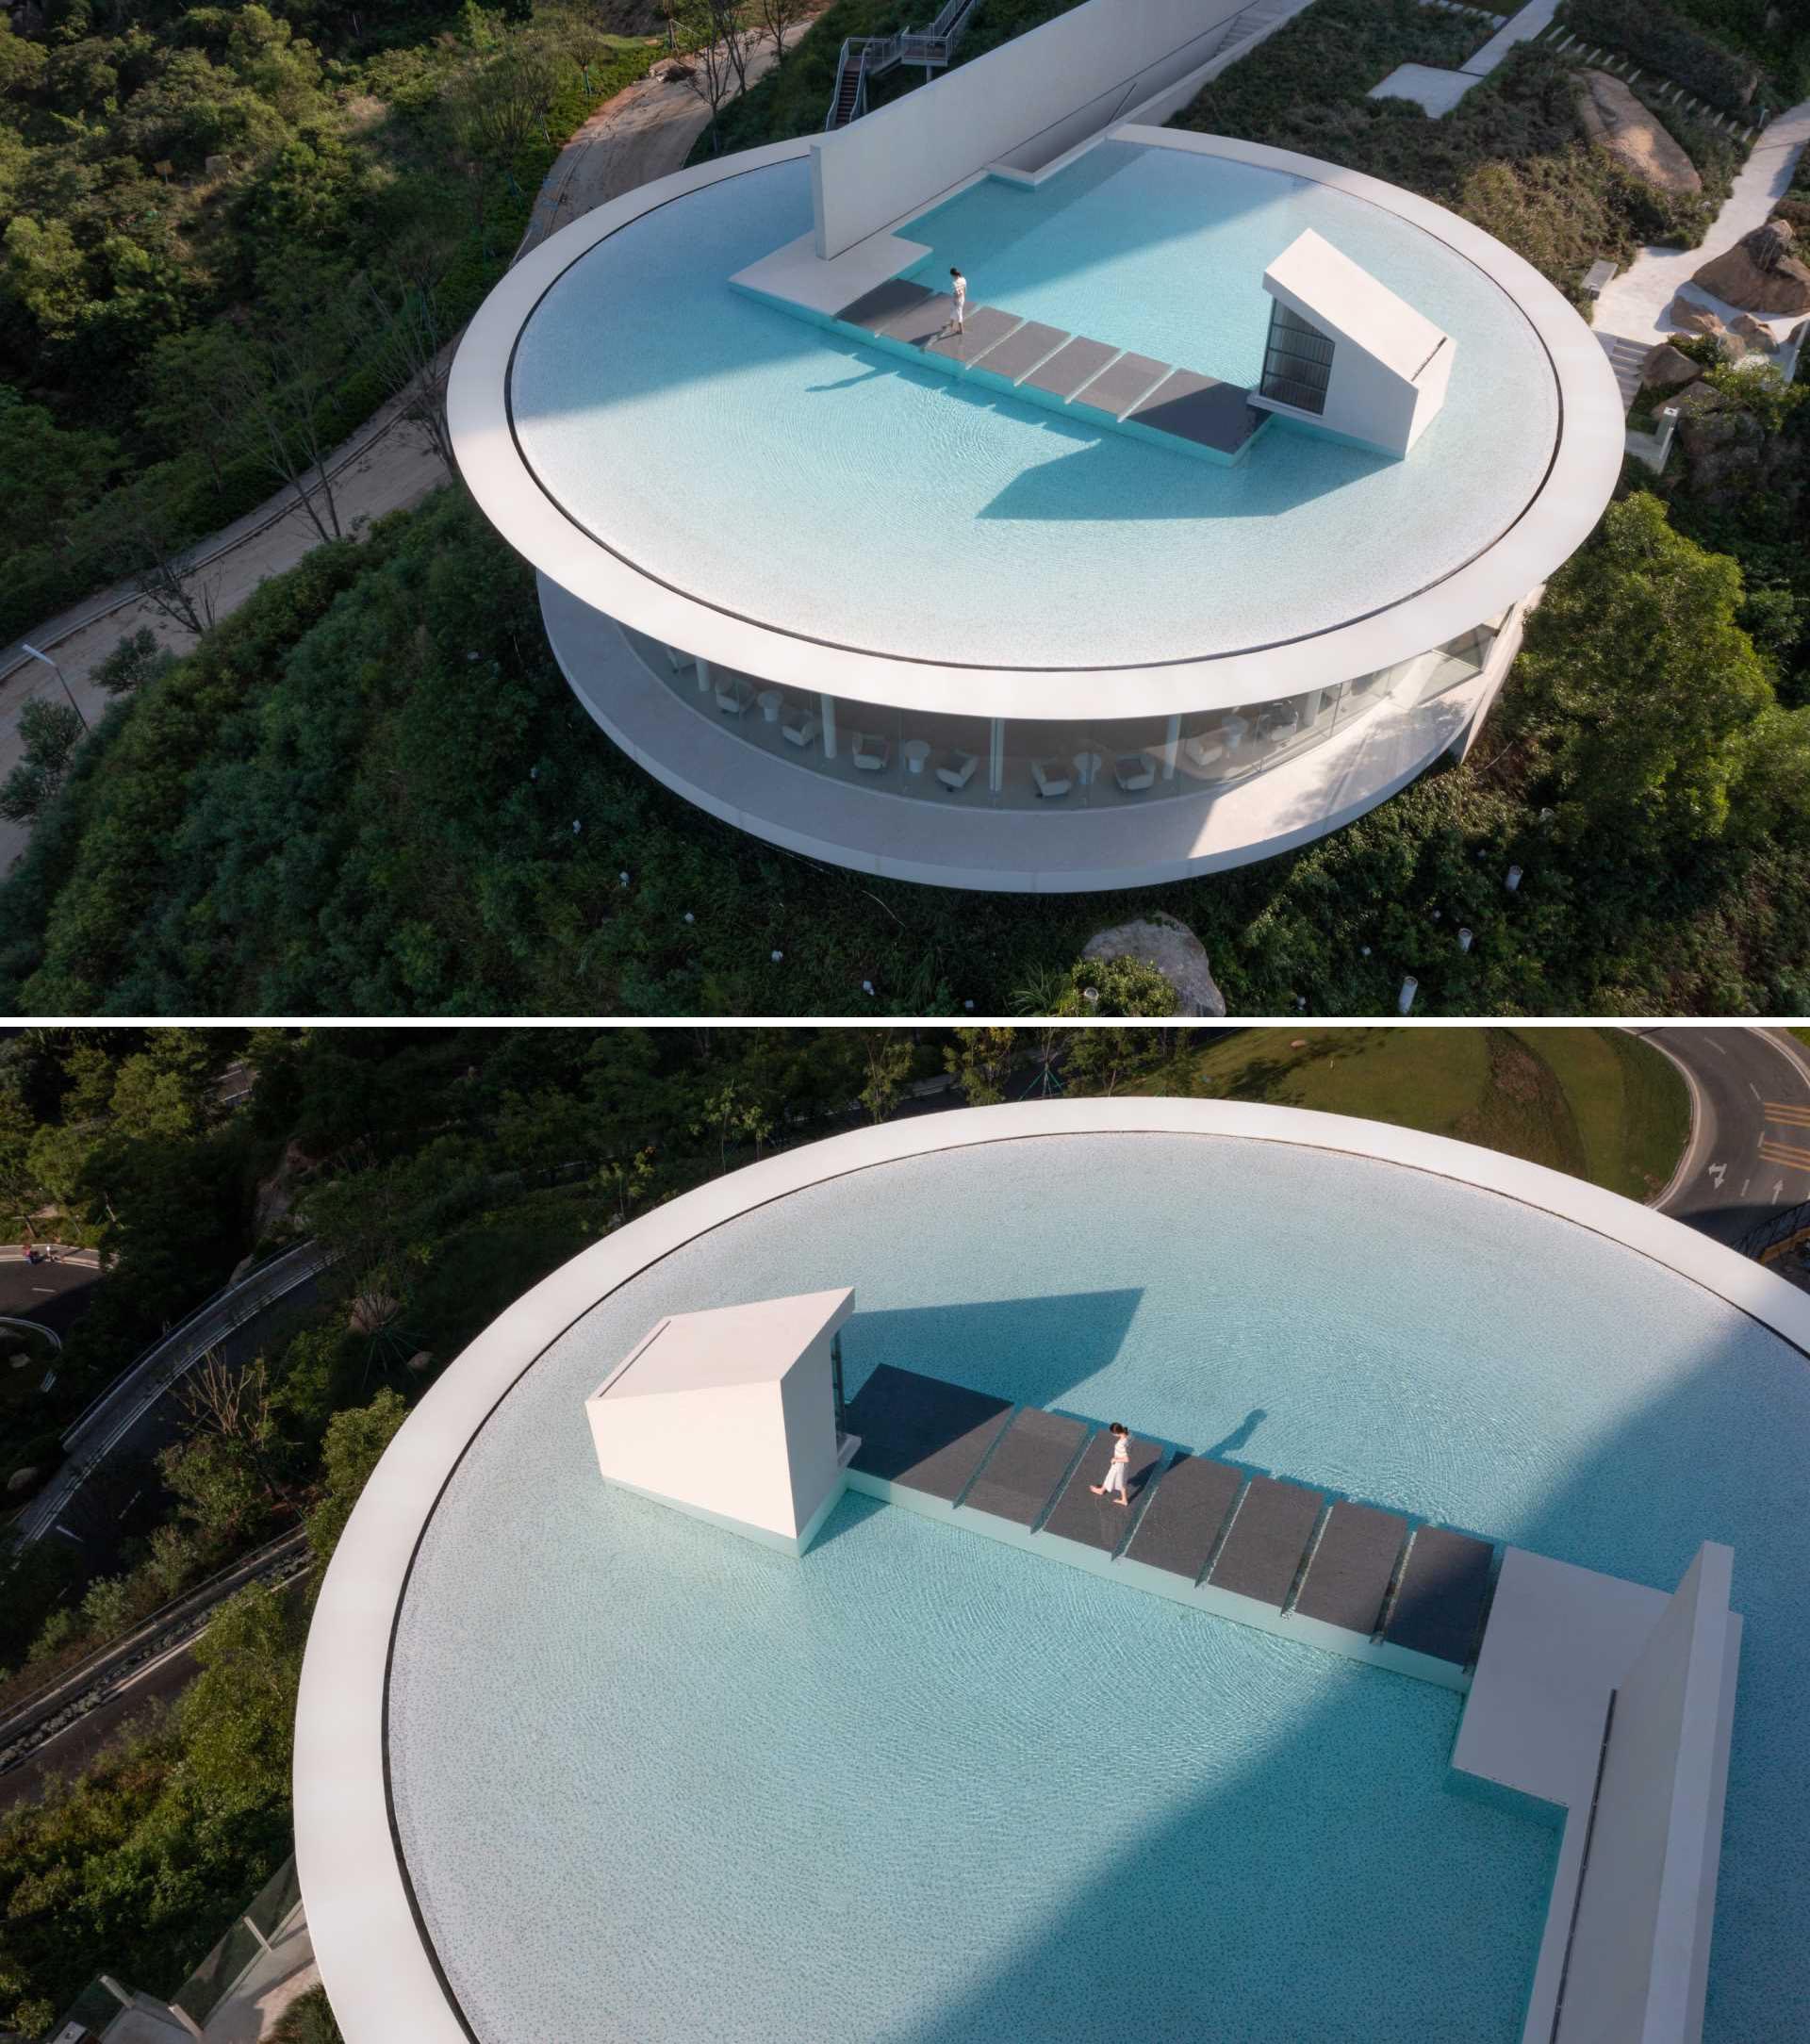 A platform located in the middle of the rooftop pool can be reached through the stepping stones that match with the water surface.